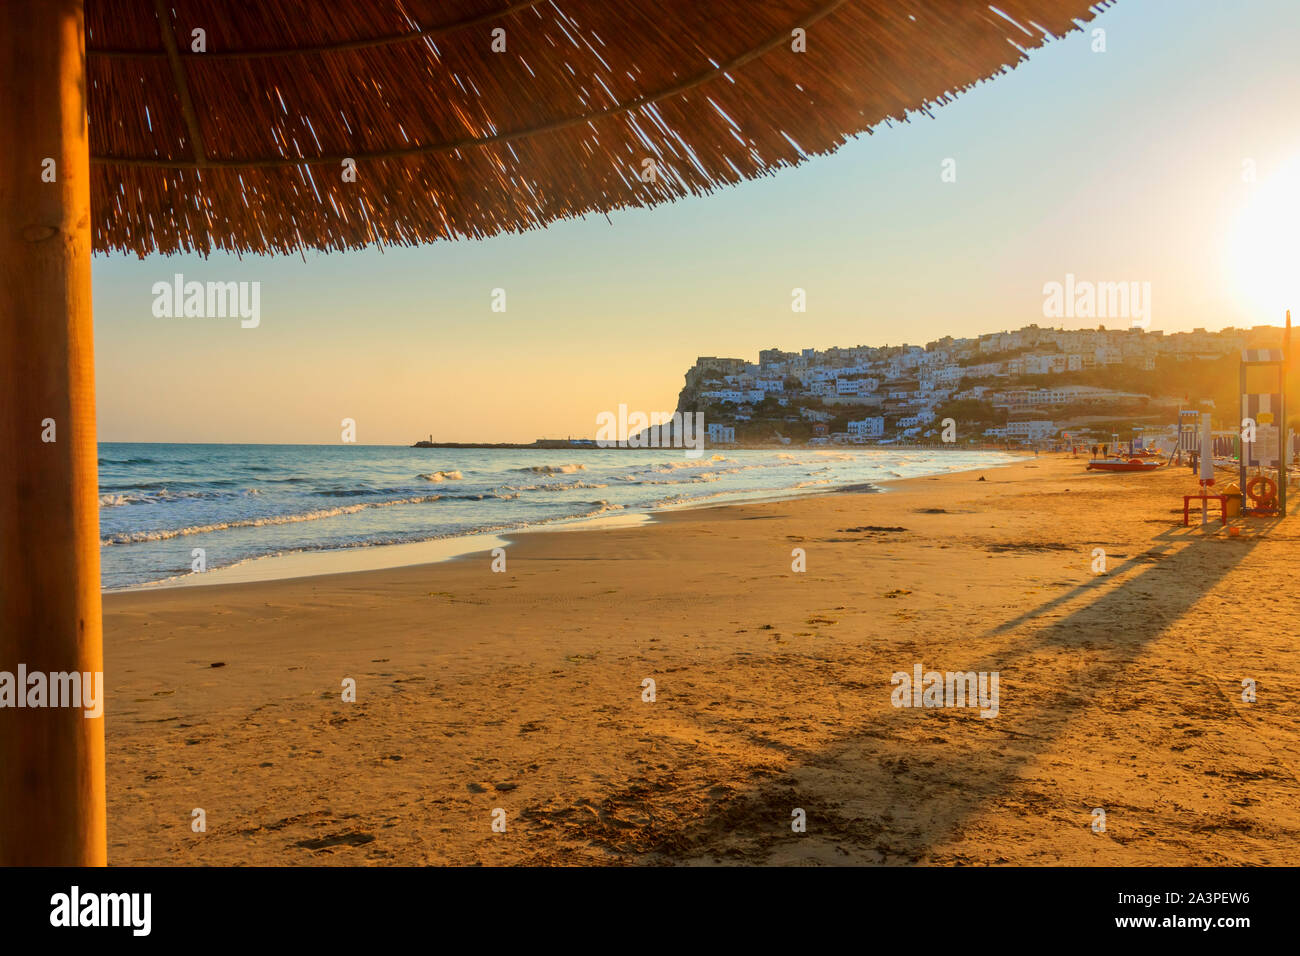 Bay of Peschici at sunrise: view of old town and sandy beach, Italy (Apulia). It's famous for its seaside resorts belongs to  Gargano Promontory. Stock Photo